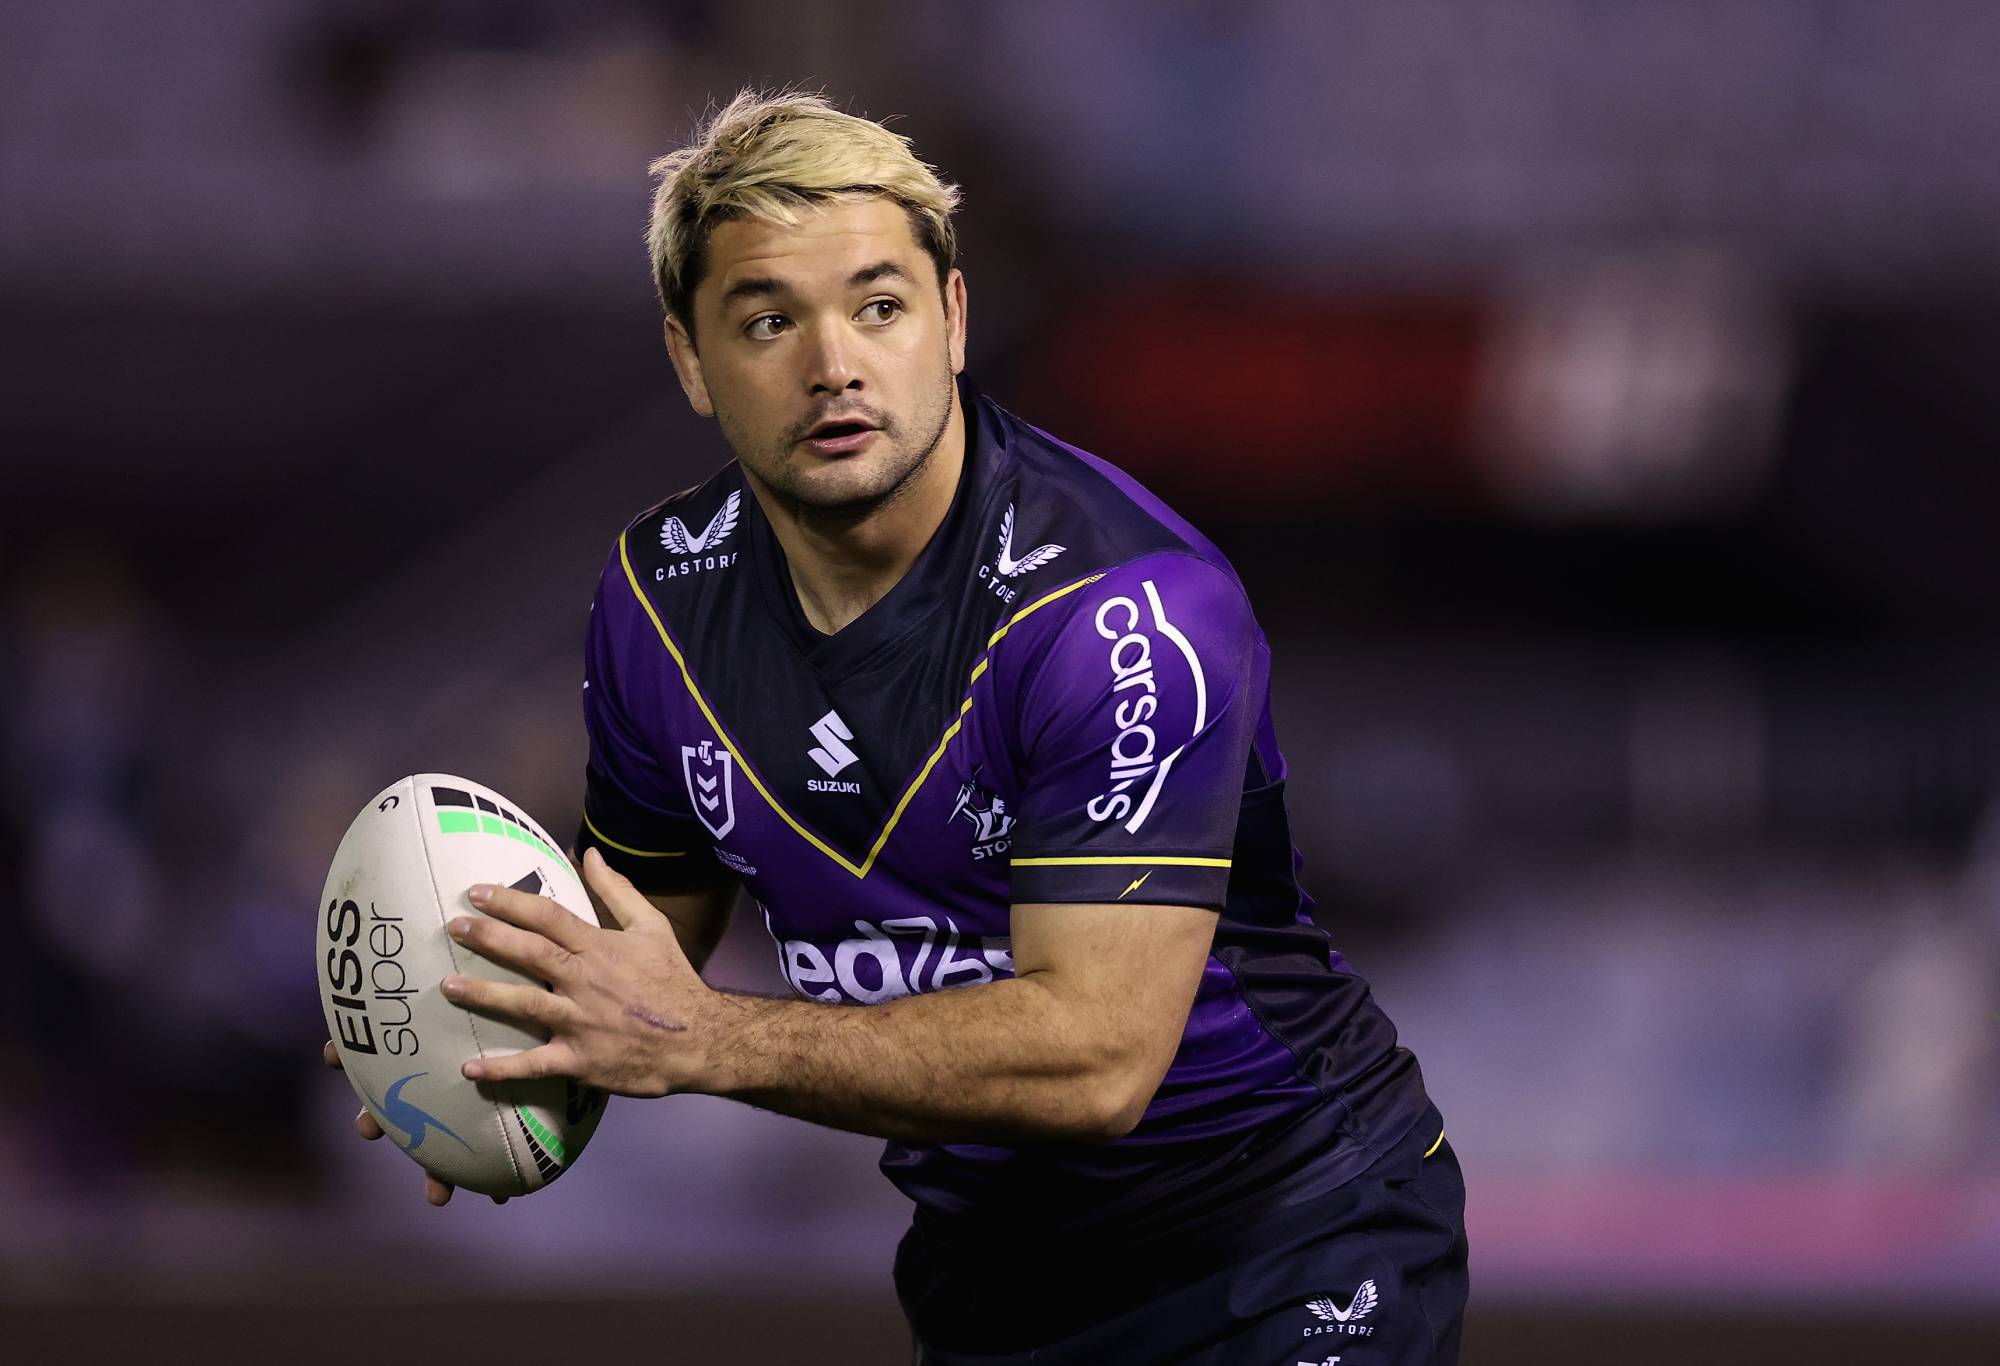 SYDNEY, AUSTRALIA - JULY 07: Brandon Smith of the Storm warms up during the round 17 NRL match between the Cronulla Sharks and the Melbourne Storm at PointsBet Stadium, on July 07, 2022, in Sydney, Australia. (Photo by Cameron Spencer/Getty Images)